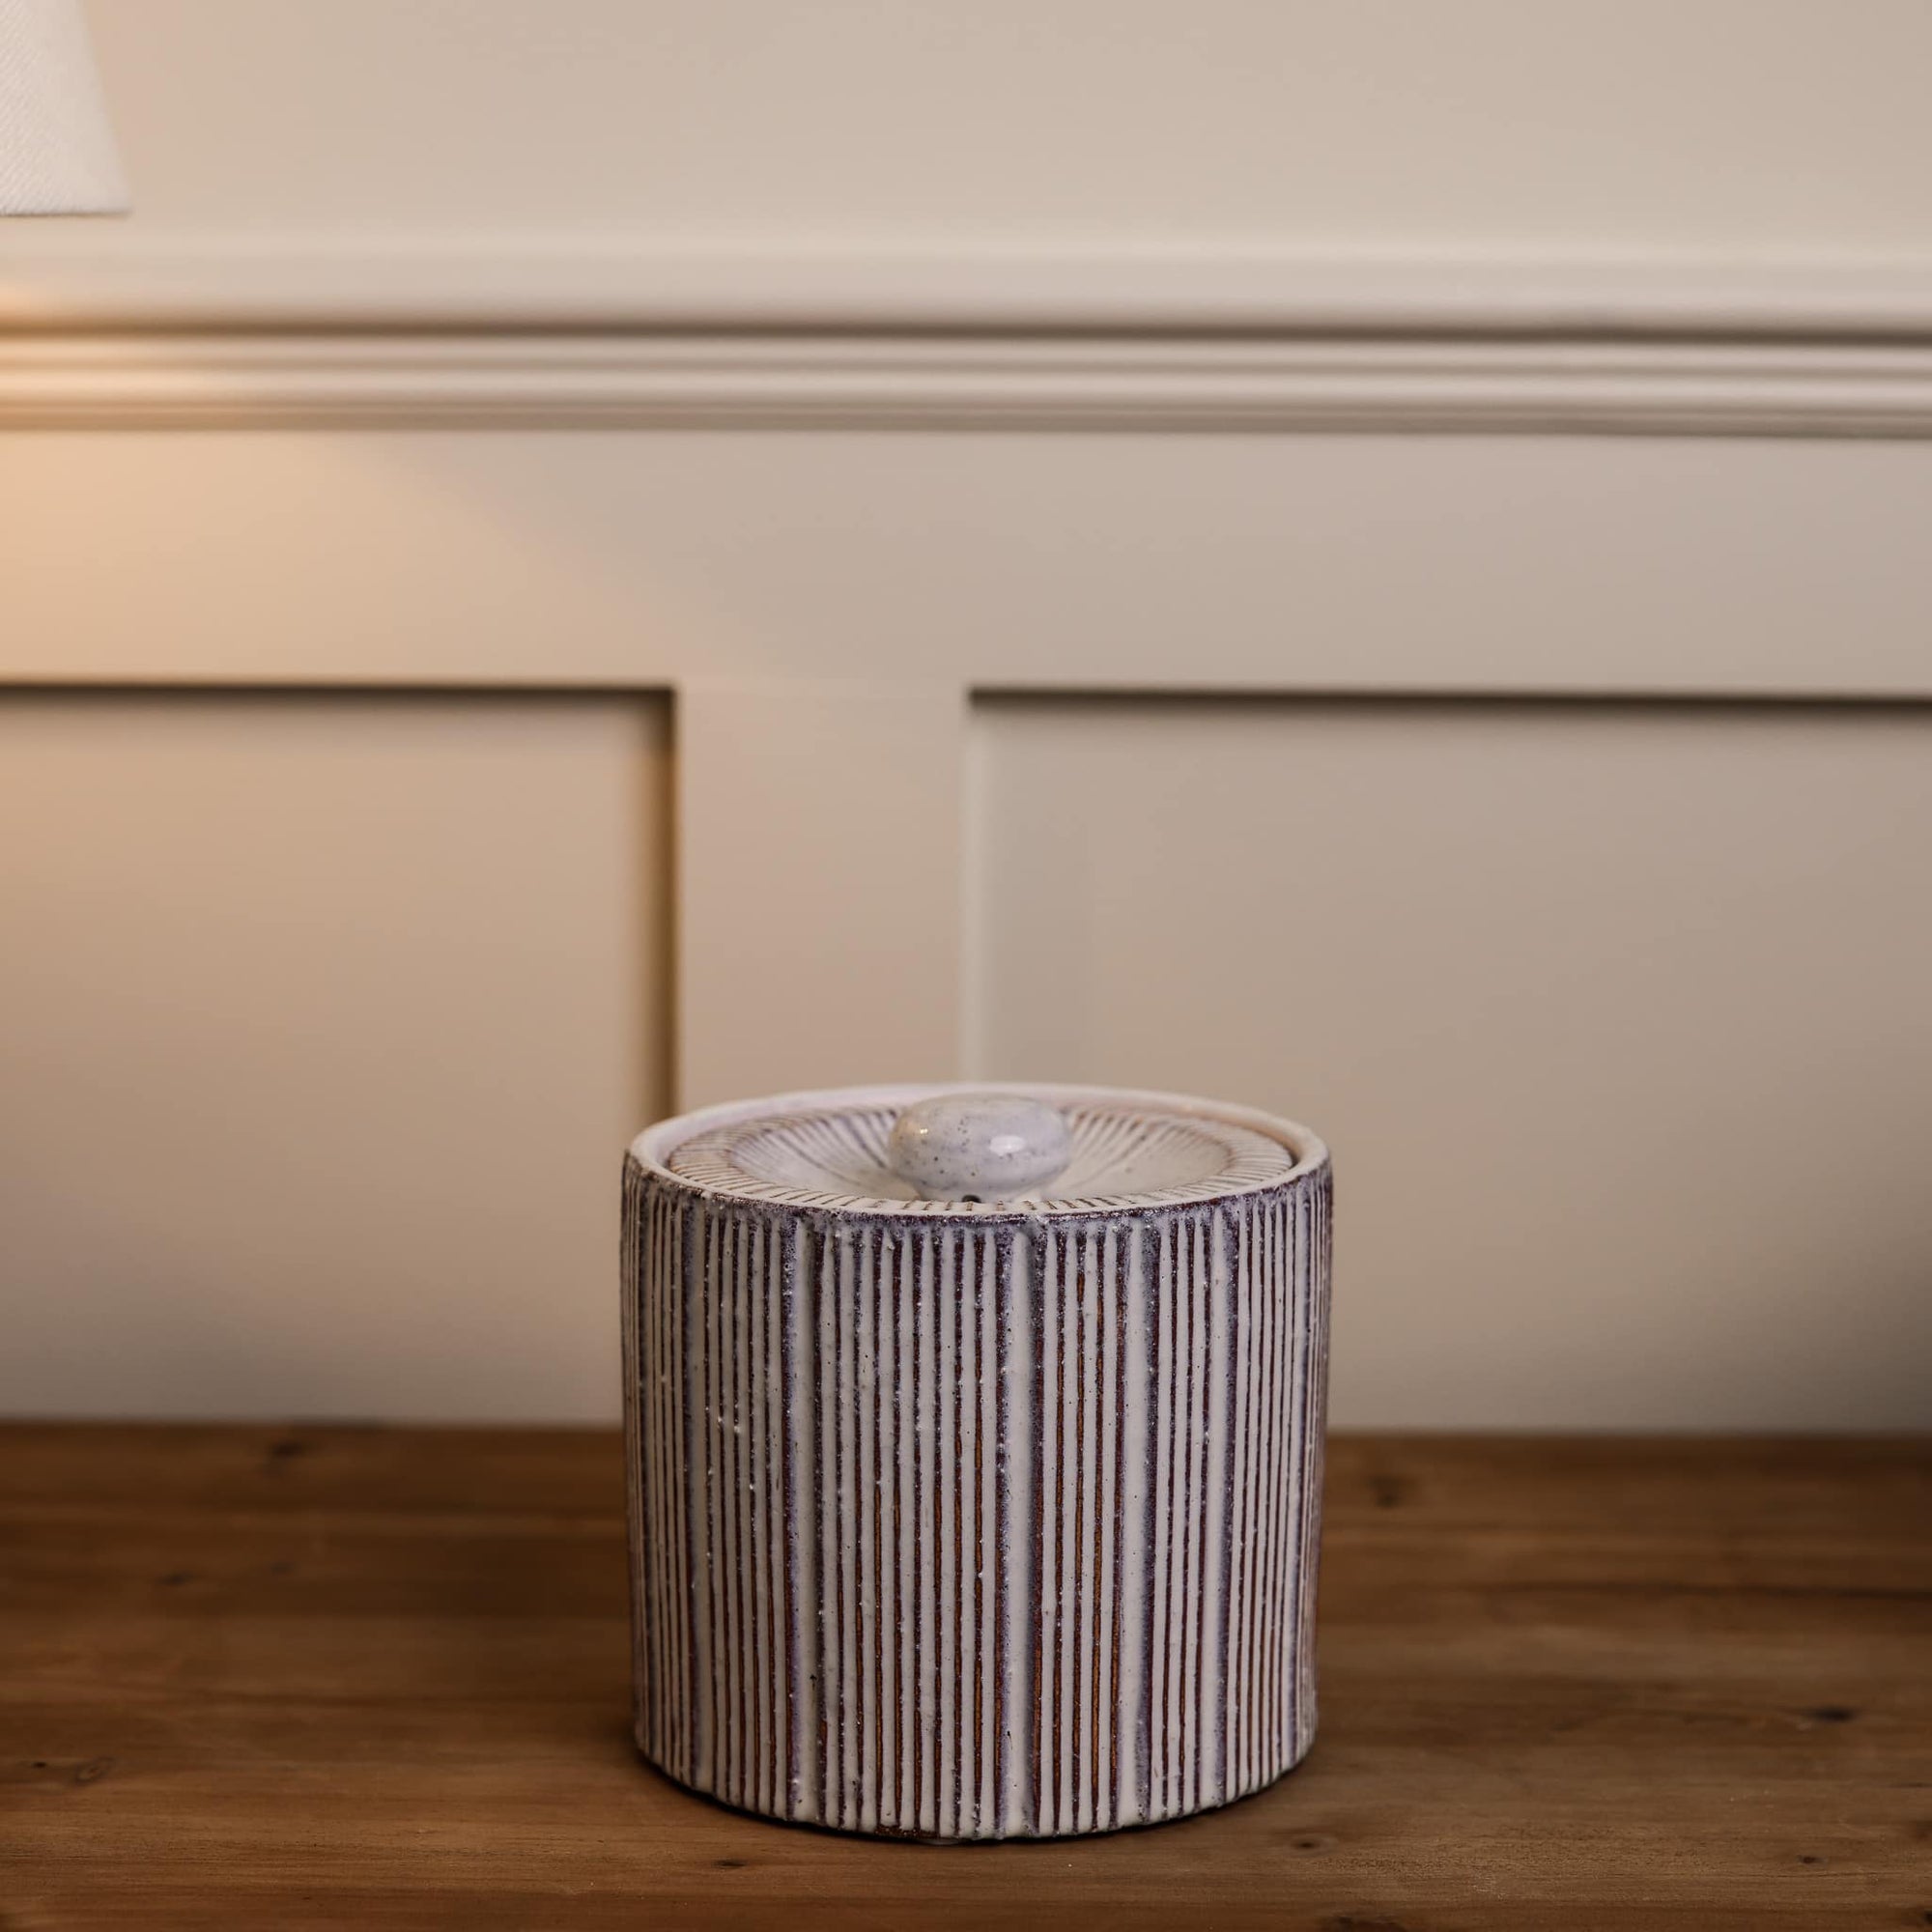 Small red and white striped ceramic storage jar on wooden console.